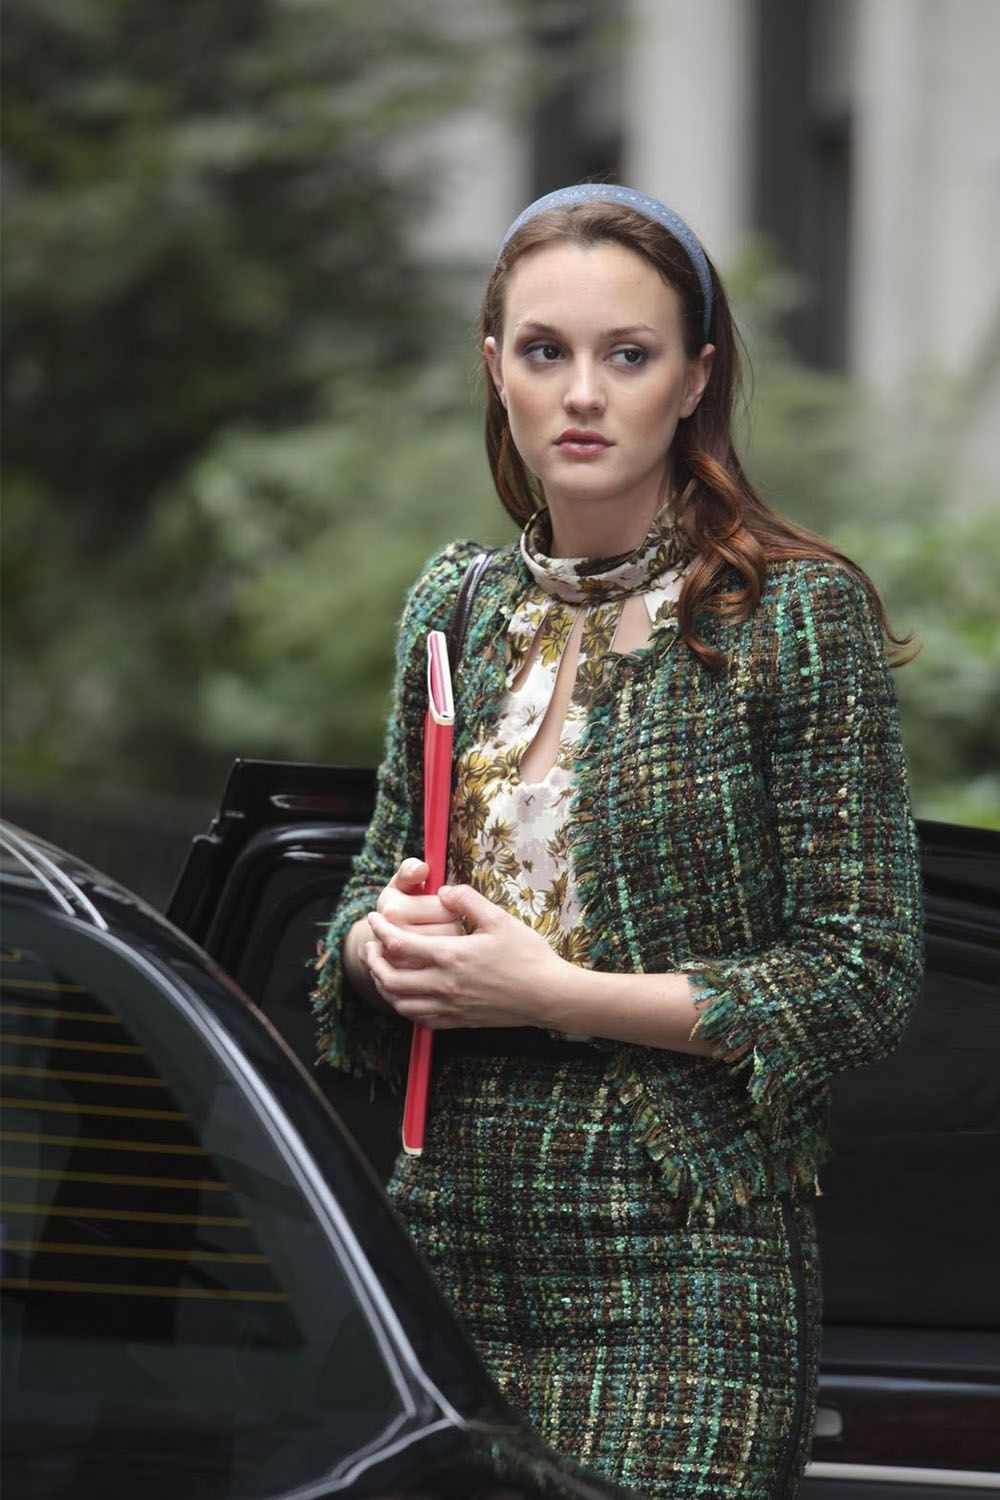 10 Best Gossip Girl Outfits Ever